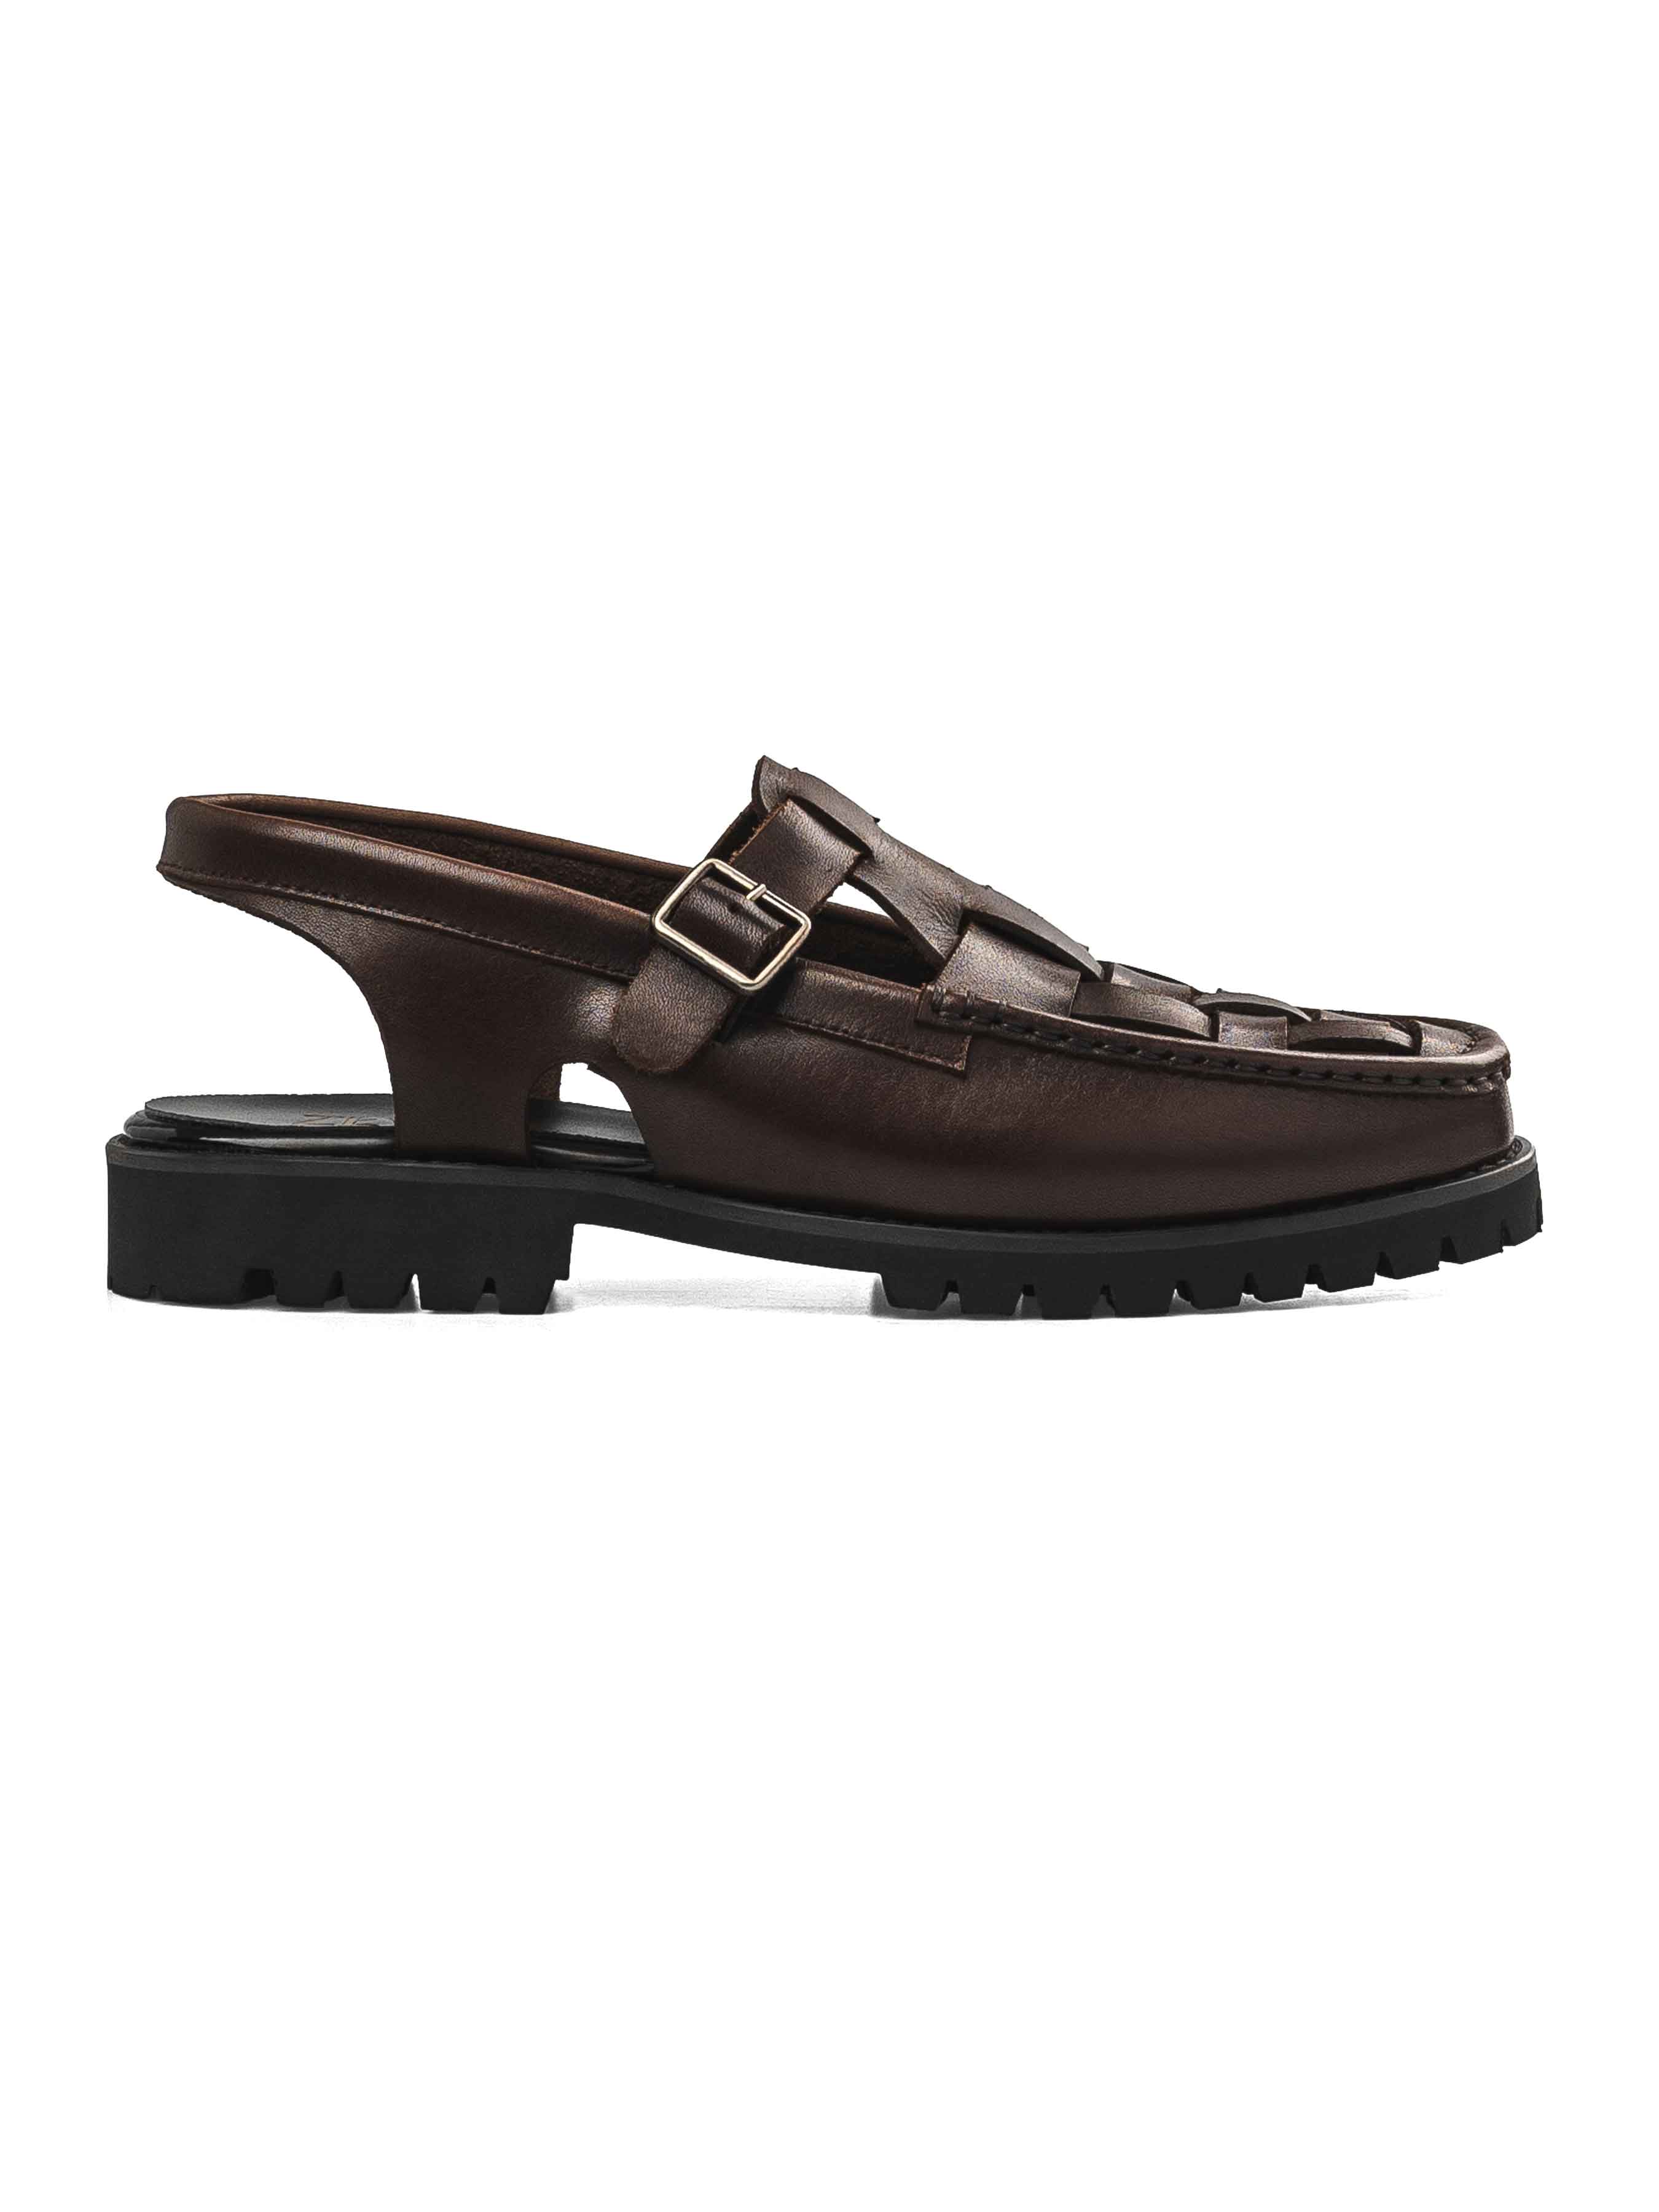 Perry Weave Sandal - Dark Brown Leather (Chunky Sole)